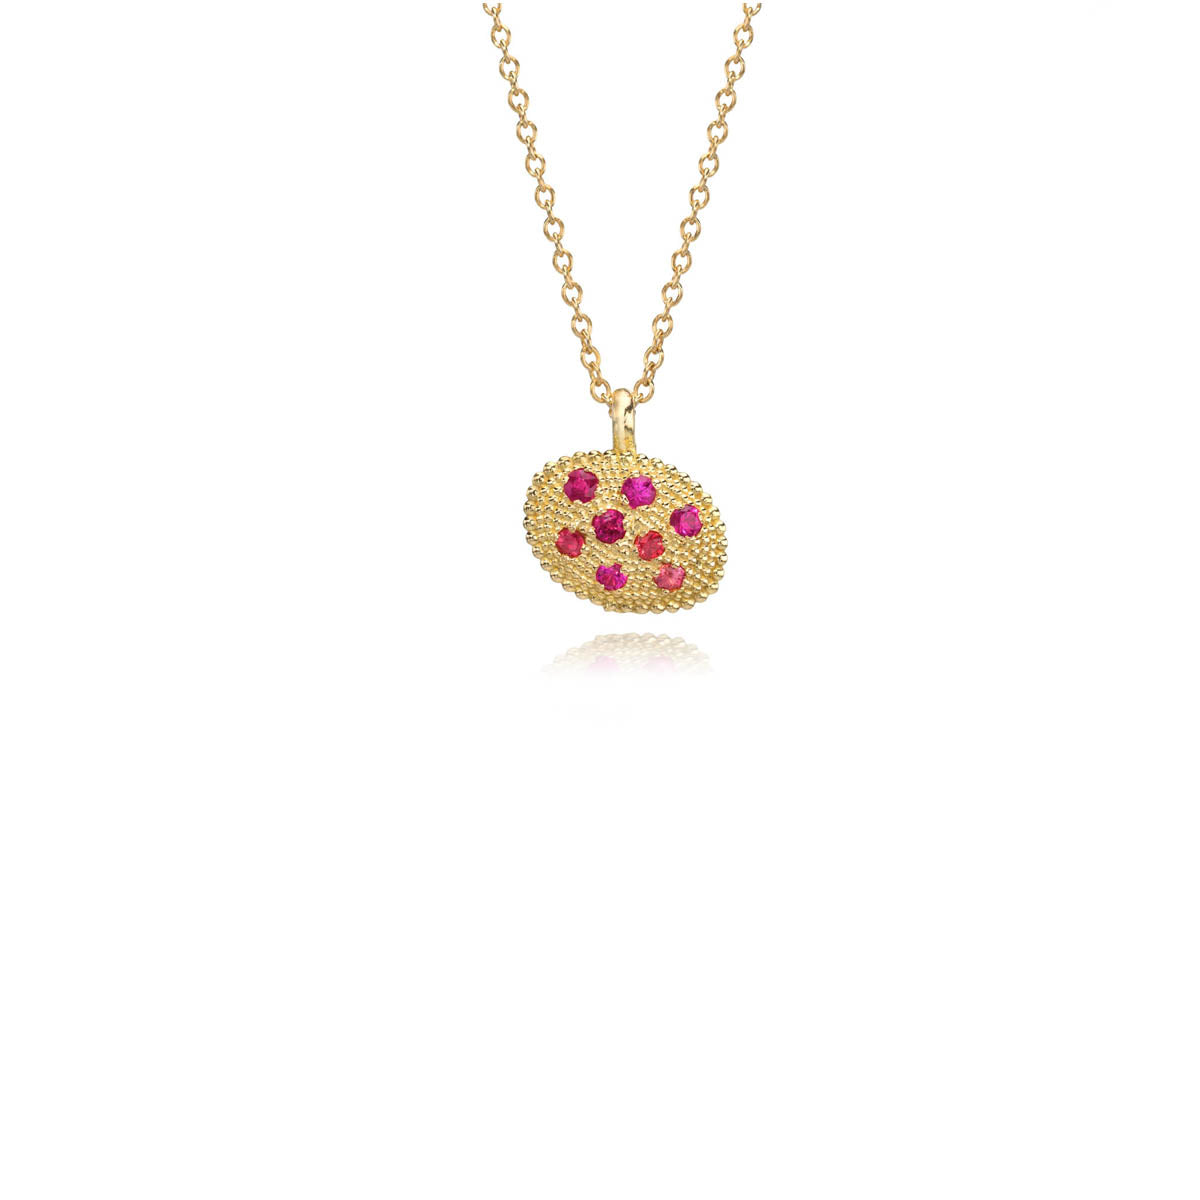 Gold Oval Charm with Sapphires and Rubies